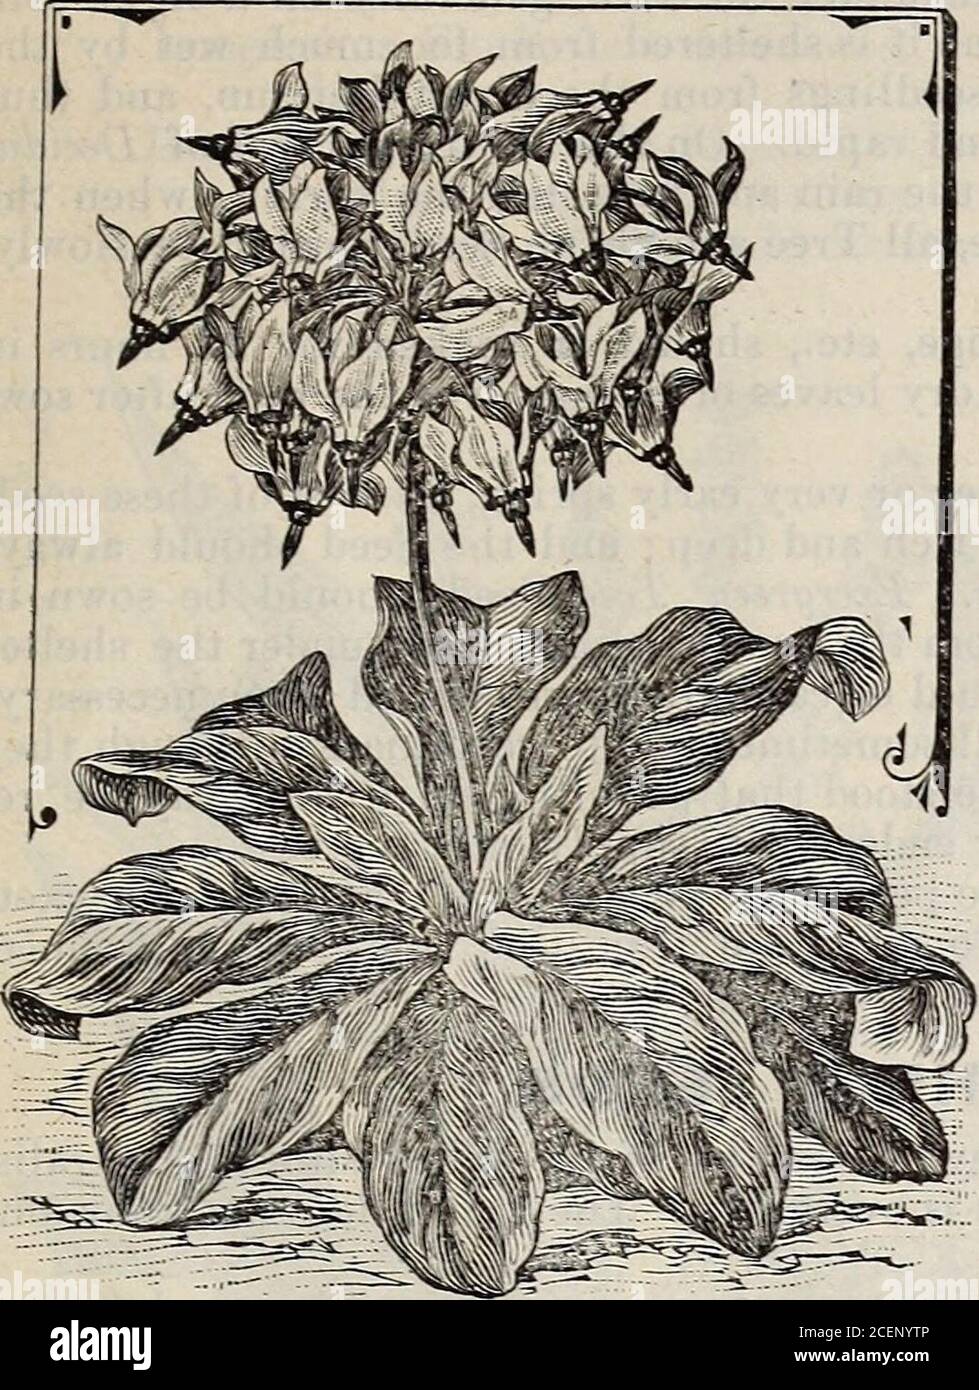 . Catalogue of seeds, agricultural & horticultural supplies and guide for the garden, field & farm. ILD FLOWER SEEDS. We offer 12 varieties, all of great beauty, some of which arevery rare and difficult to obtain. Perpkt. Antirrhinum Orcuttianum (Cal. Snapdragon). White or violet 15c Dicentra Chrysantha (Cal. Bleeding Heart). Lemon yellow 15c Dodecatkeon Clevelandii (Shooting Star). Purple bor-dered yellow, (see cut) 15c Einmenantha Penduliflora. Yerv rare and handsome. Yellow Bells 25c Esclischoltzia California (Cal. Poppy). Yellow 5c Lathyrus Californicus (Cal. Pea). Crimson 15c Oxyura Chrys Stock Photo